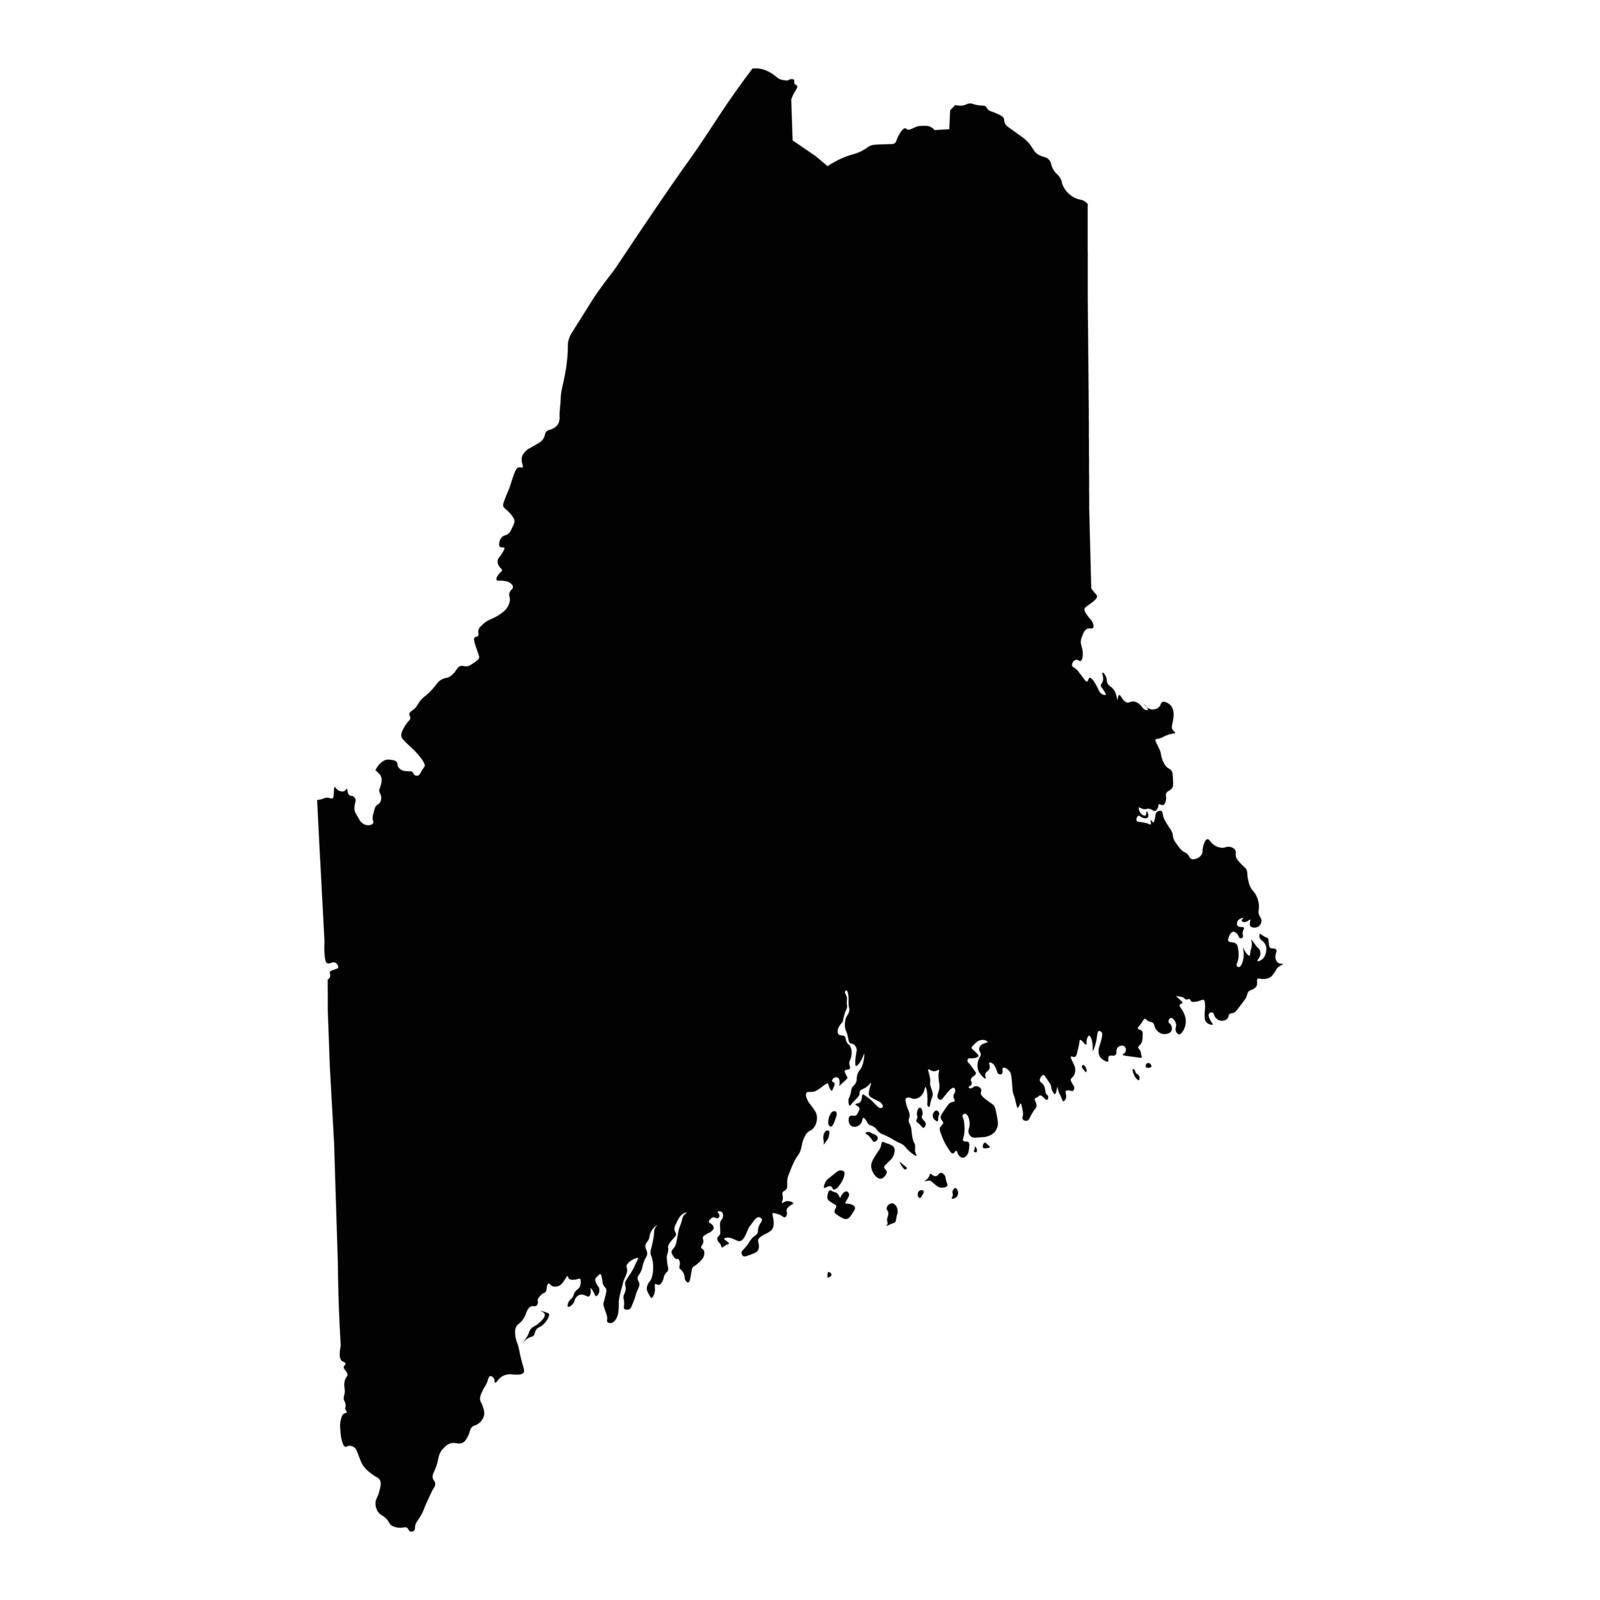 Maine ME state Maps. Black silhouette solid map isolated on a white background. EPS Vector